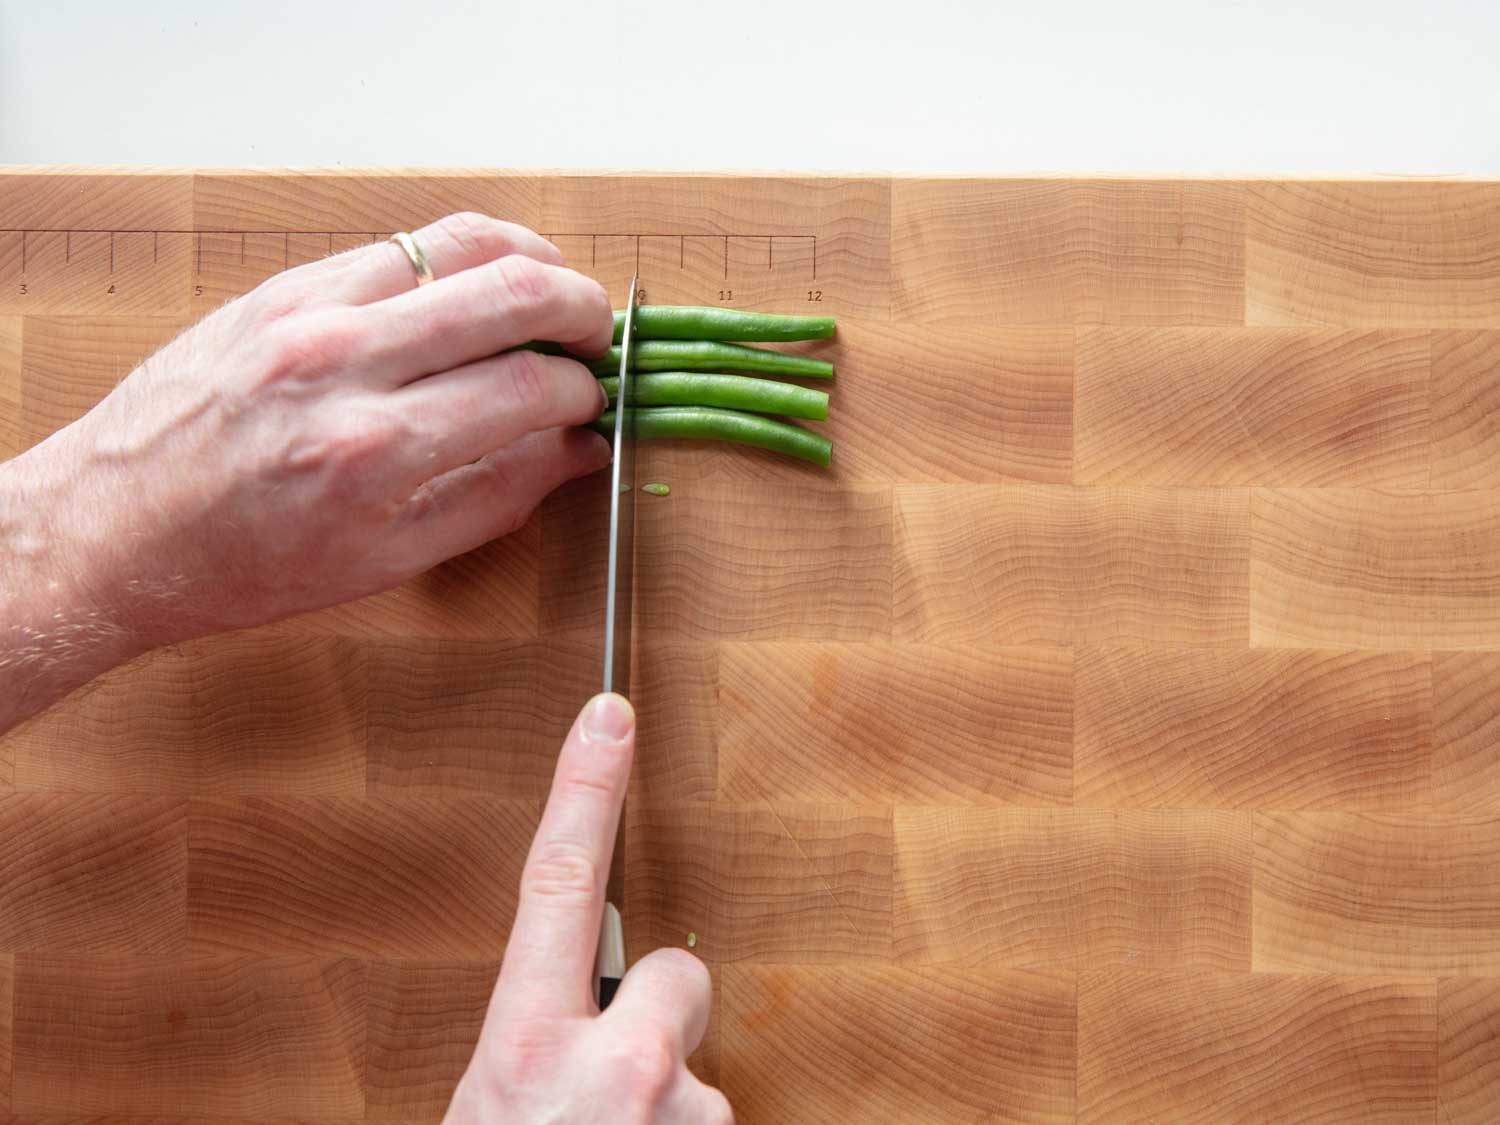 Cutting green beans on the BoardSmith Serious Eats cutting board.